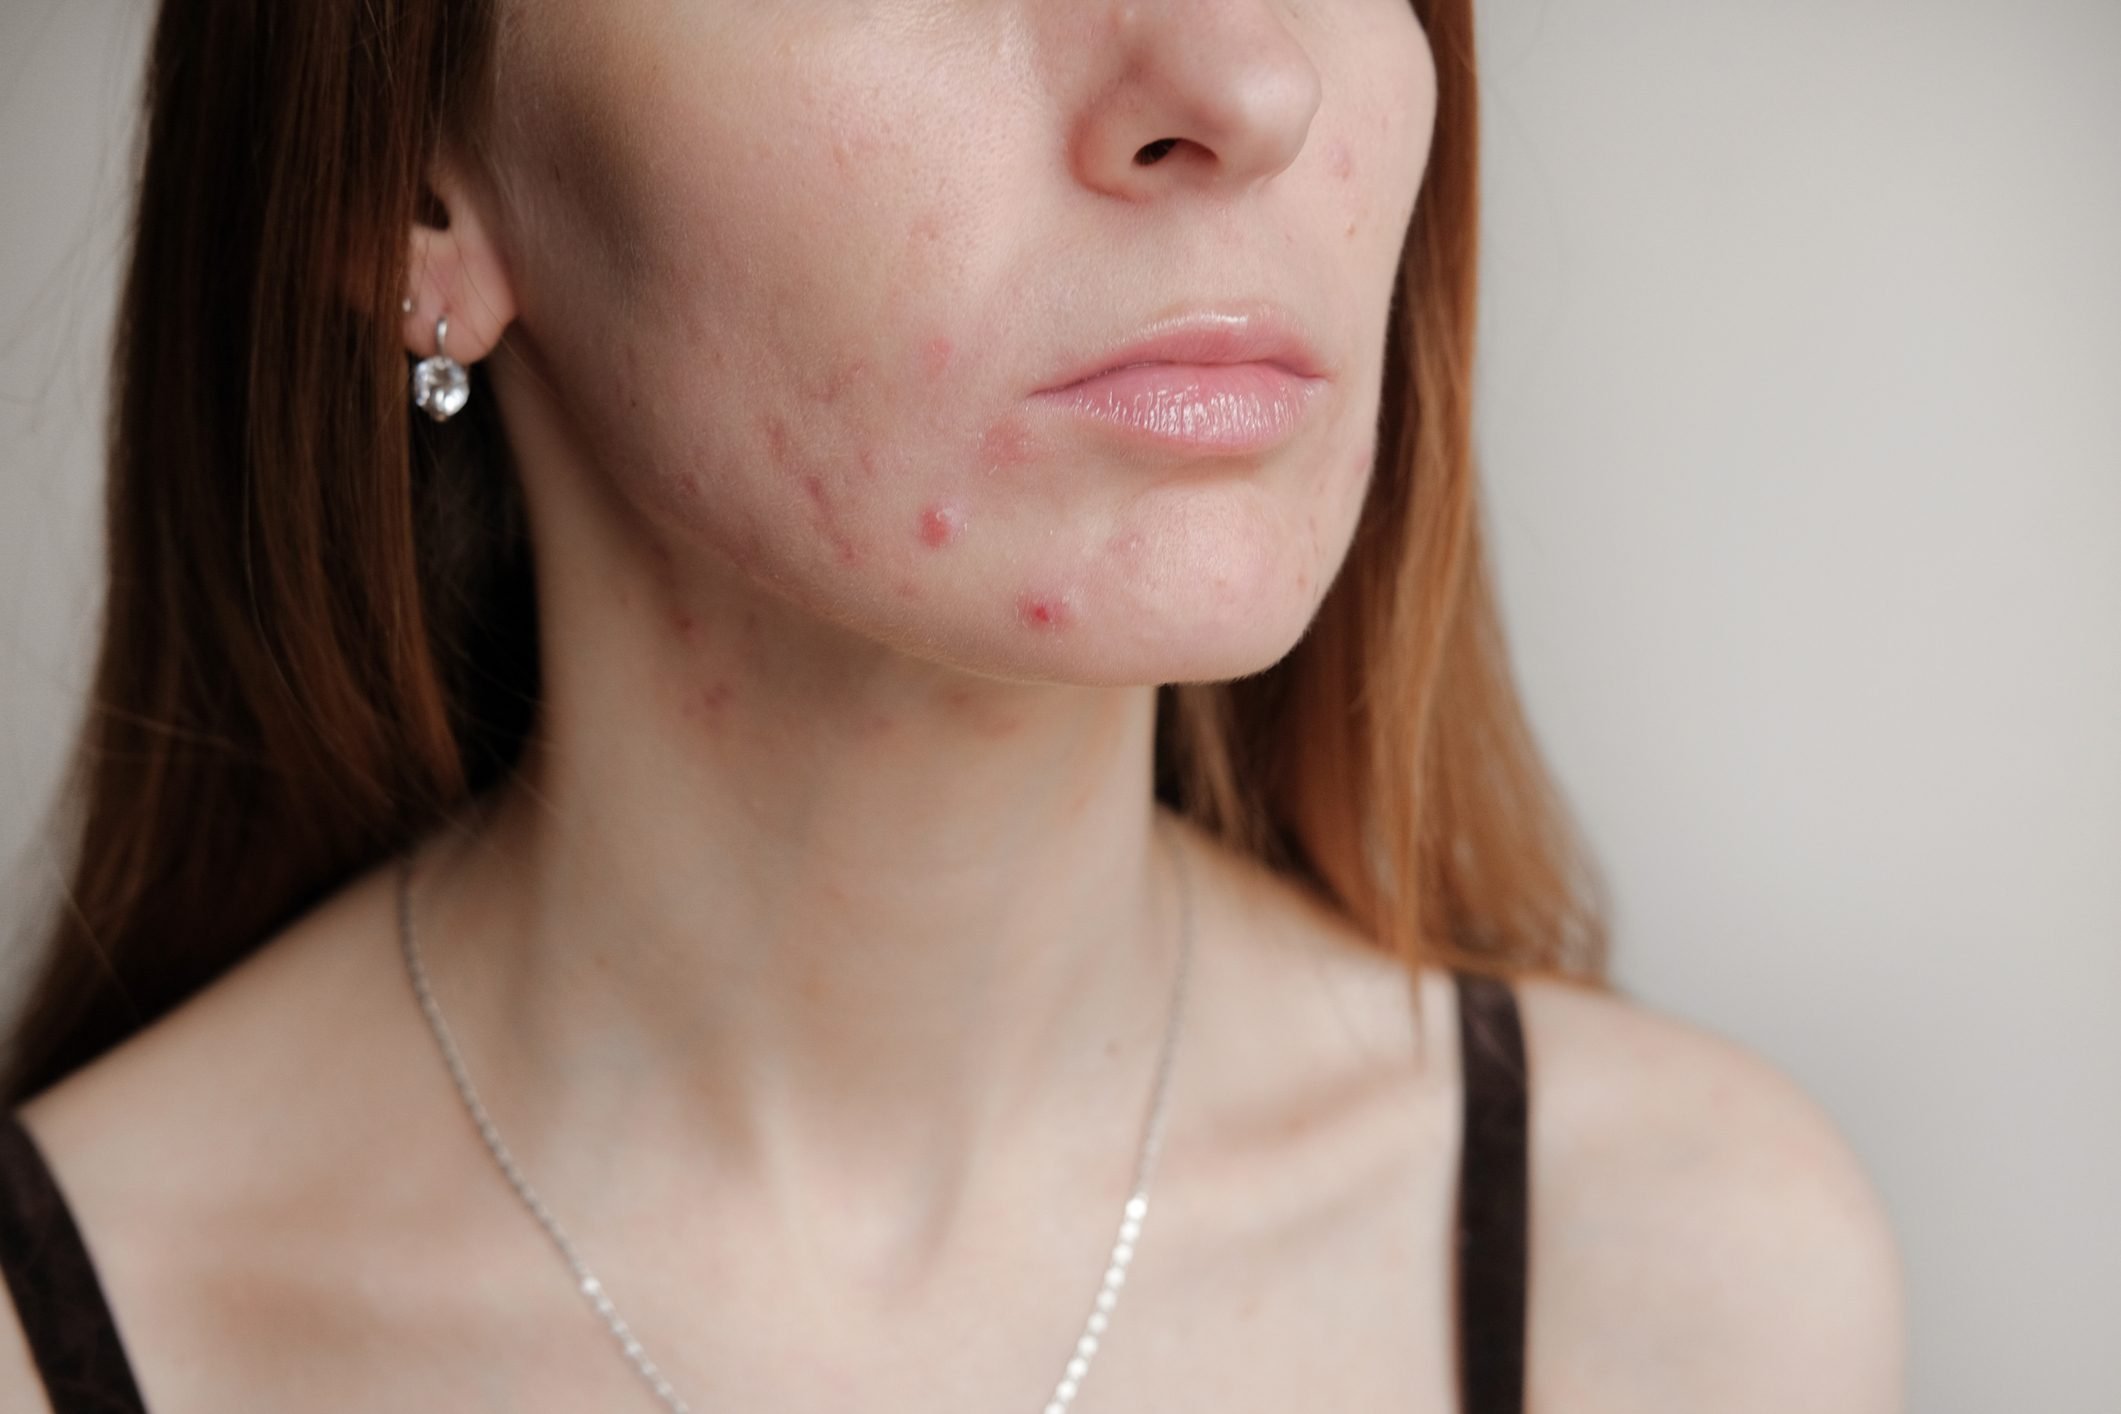 What Is Post-Inflammatory Erythema? These Post-Acne Red Spots Aren't Scars